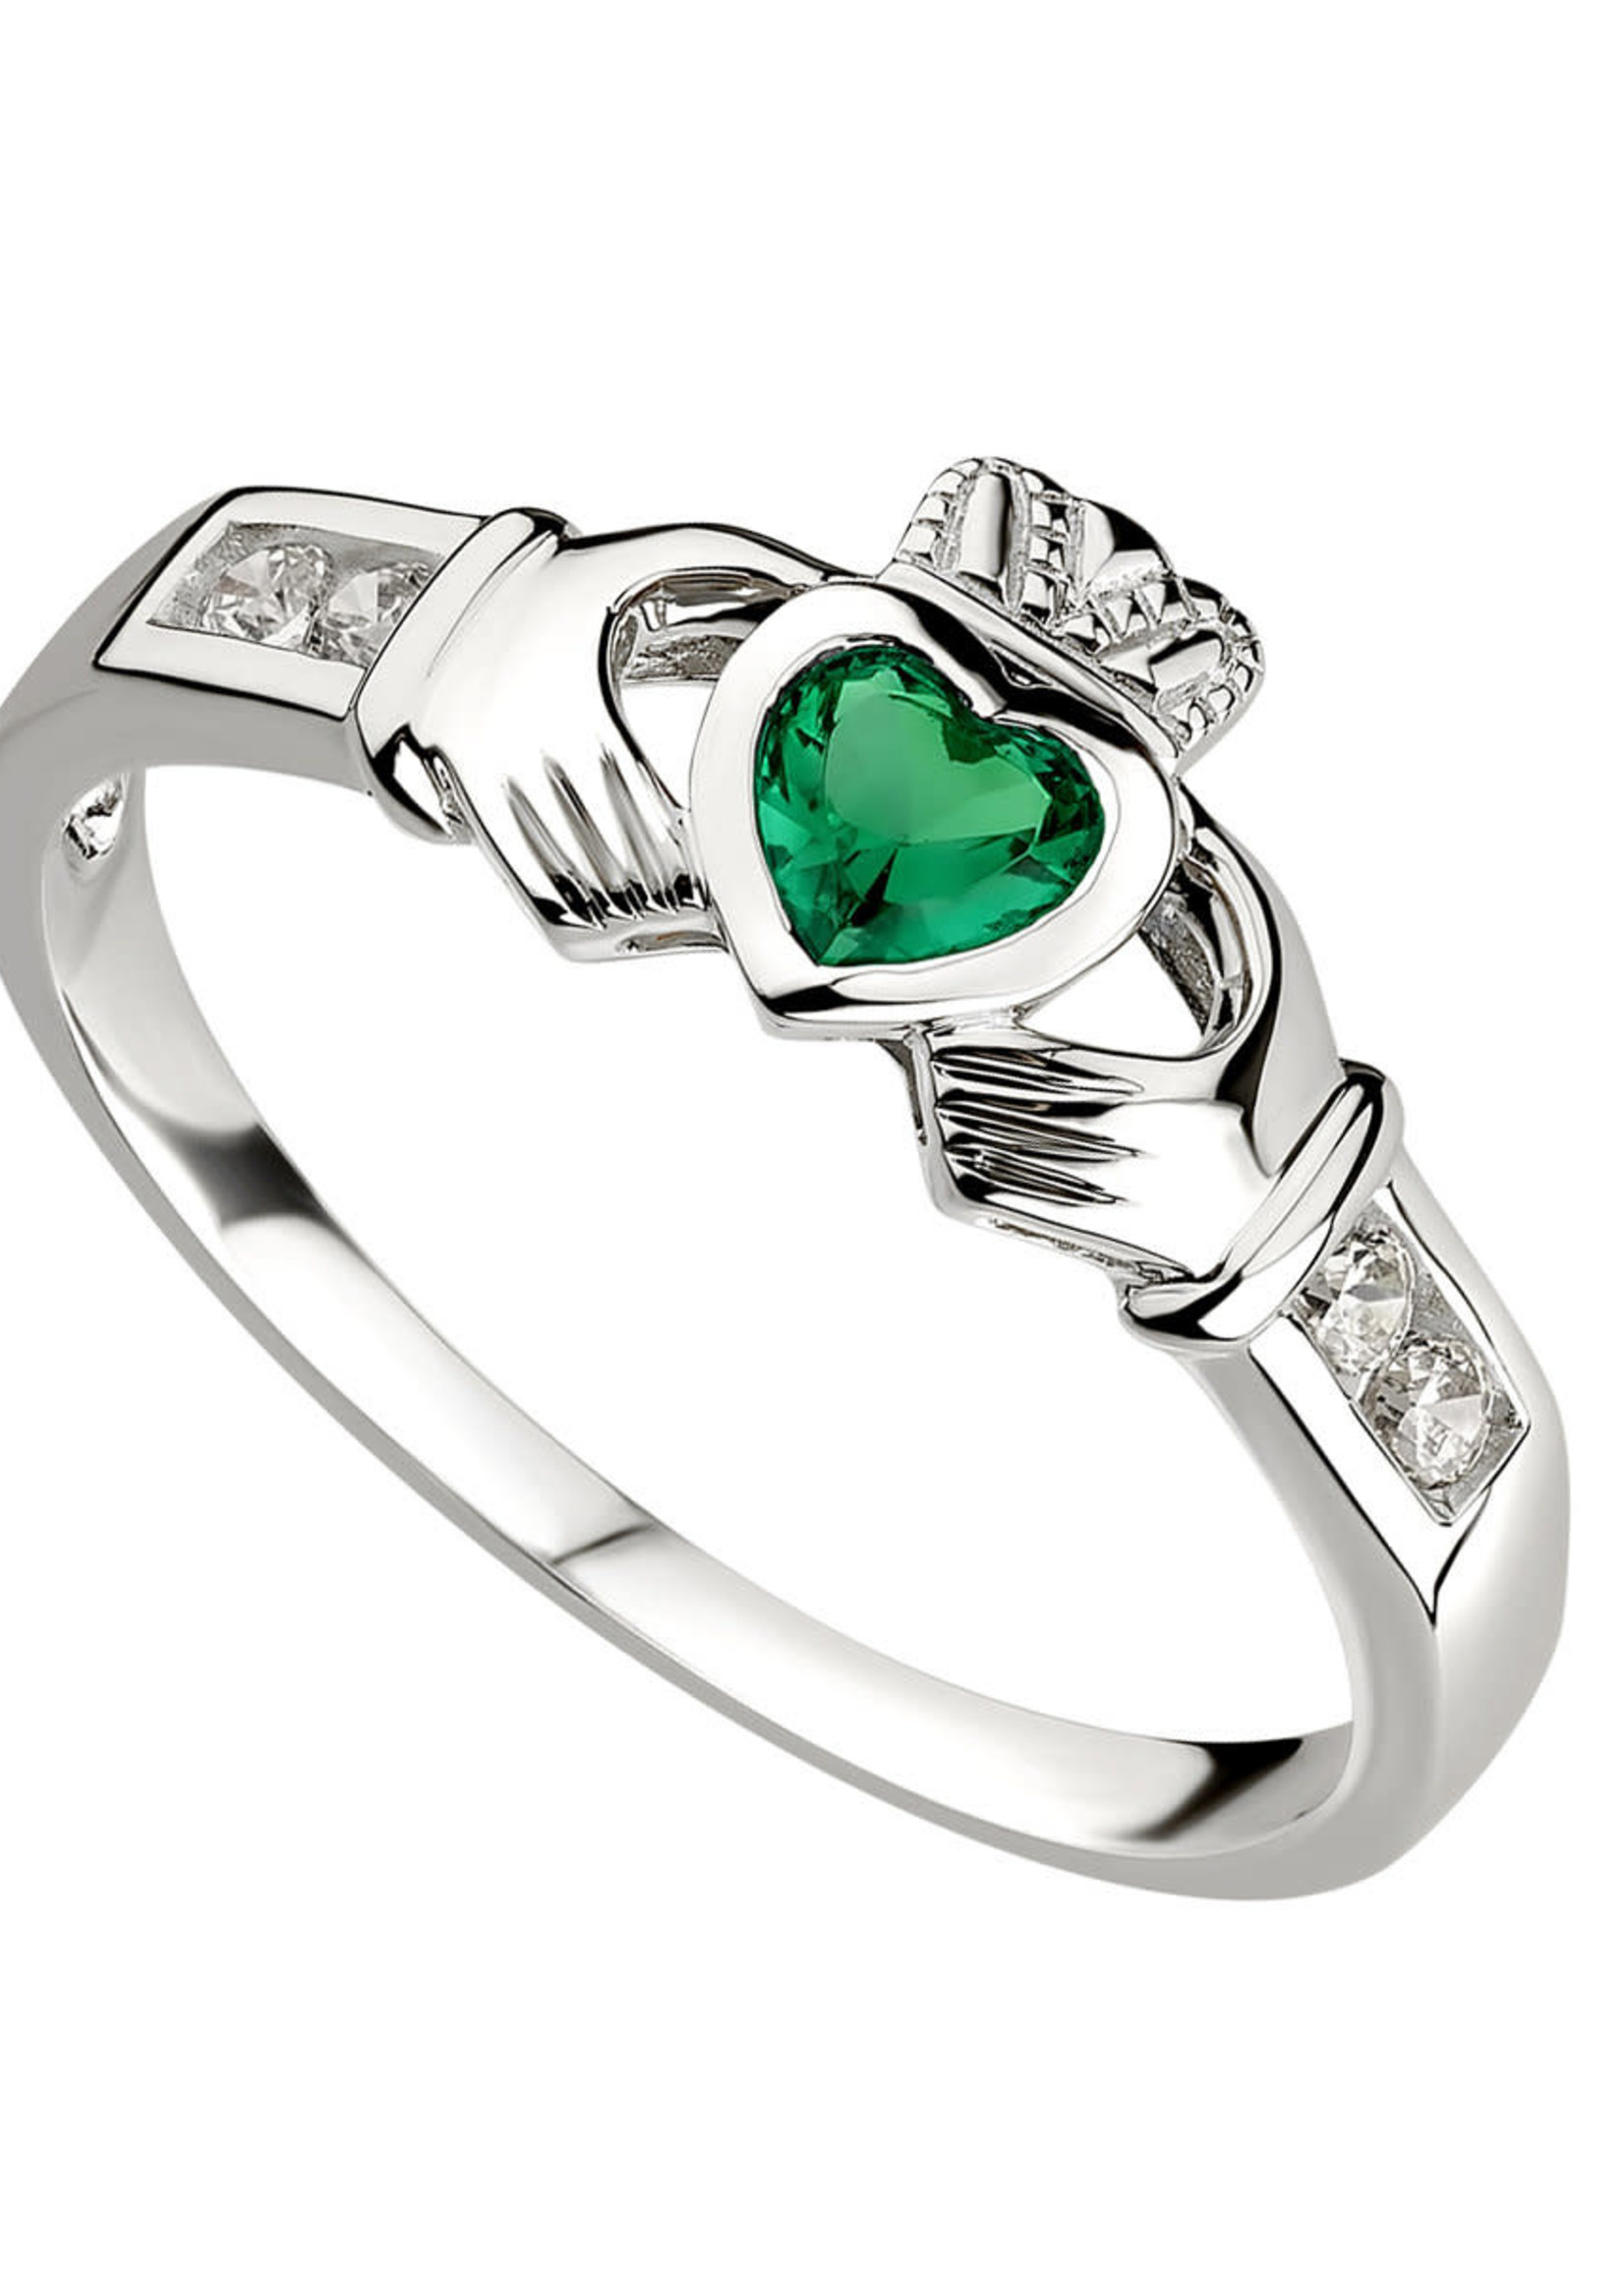 SOLVAR LIMITED Sterling Silver Synthetic Emerald/CZ Claddagh Ring Sz5